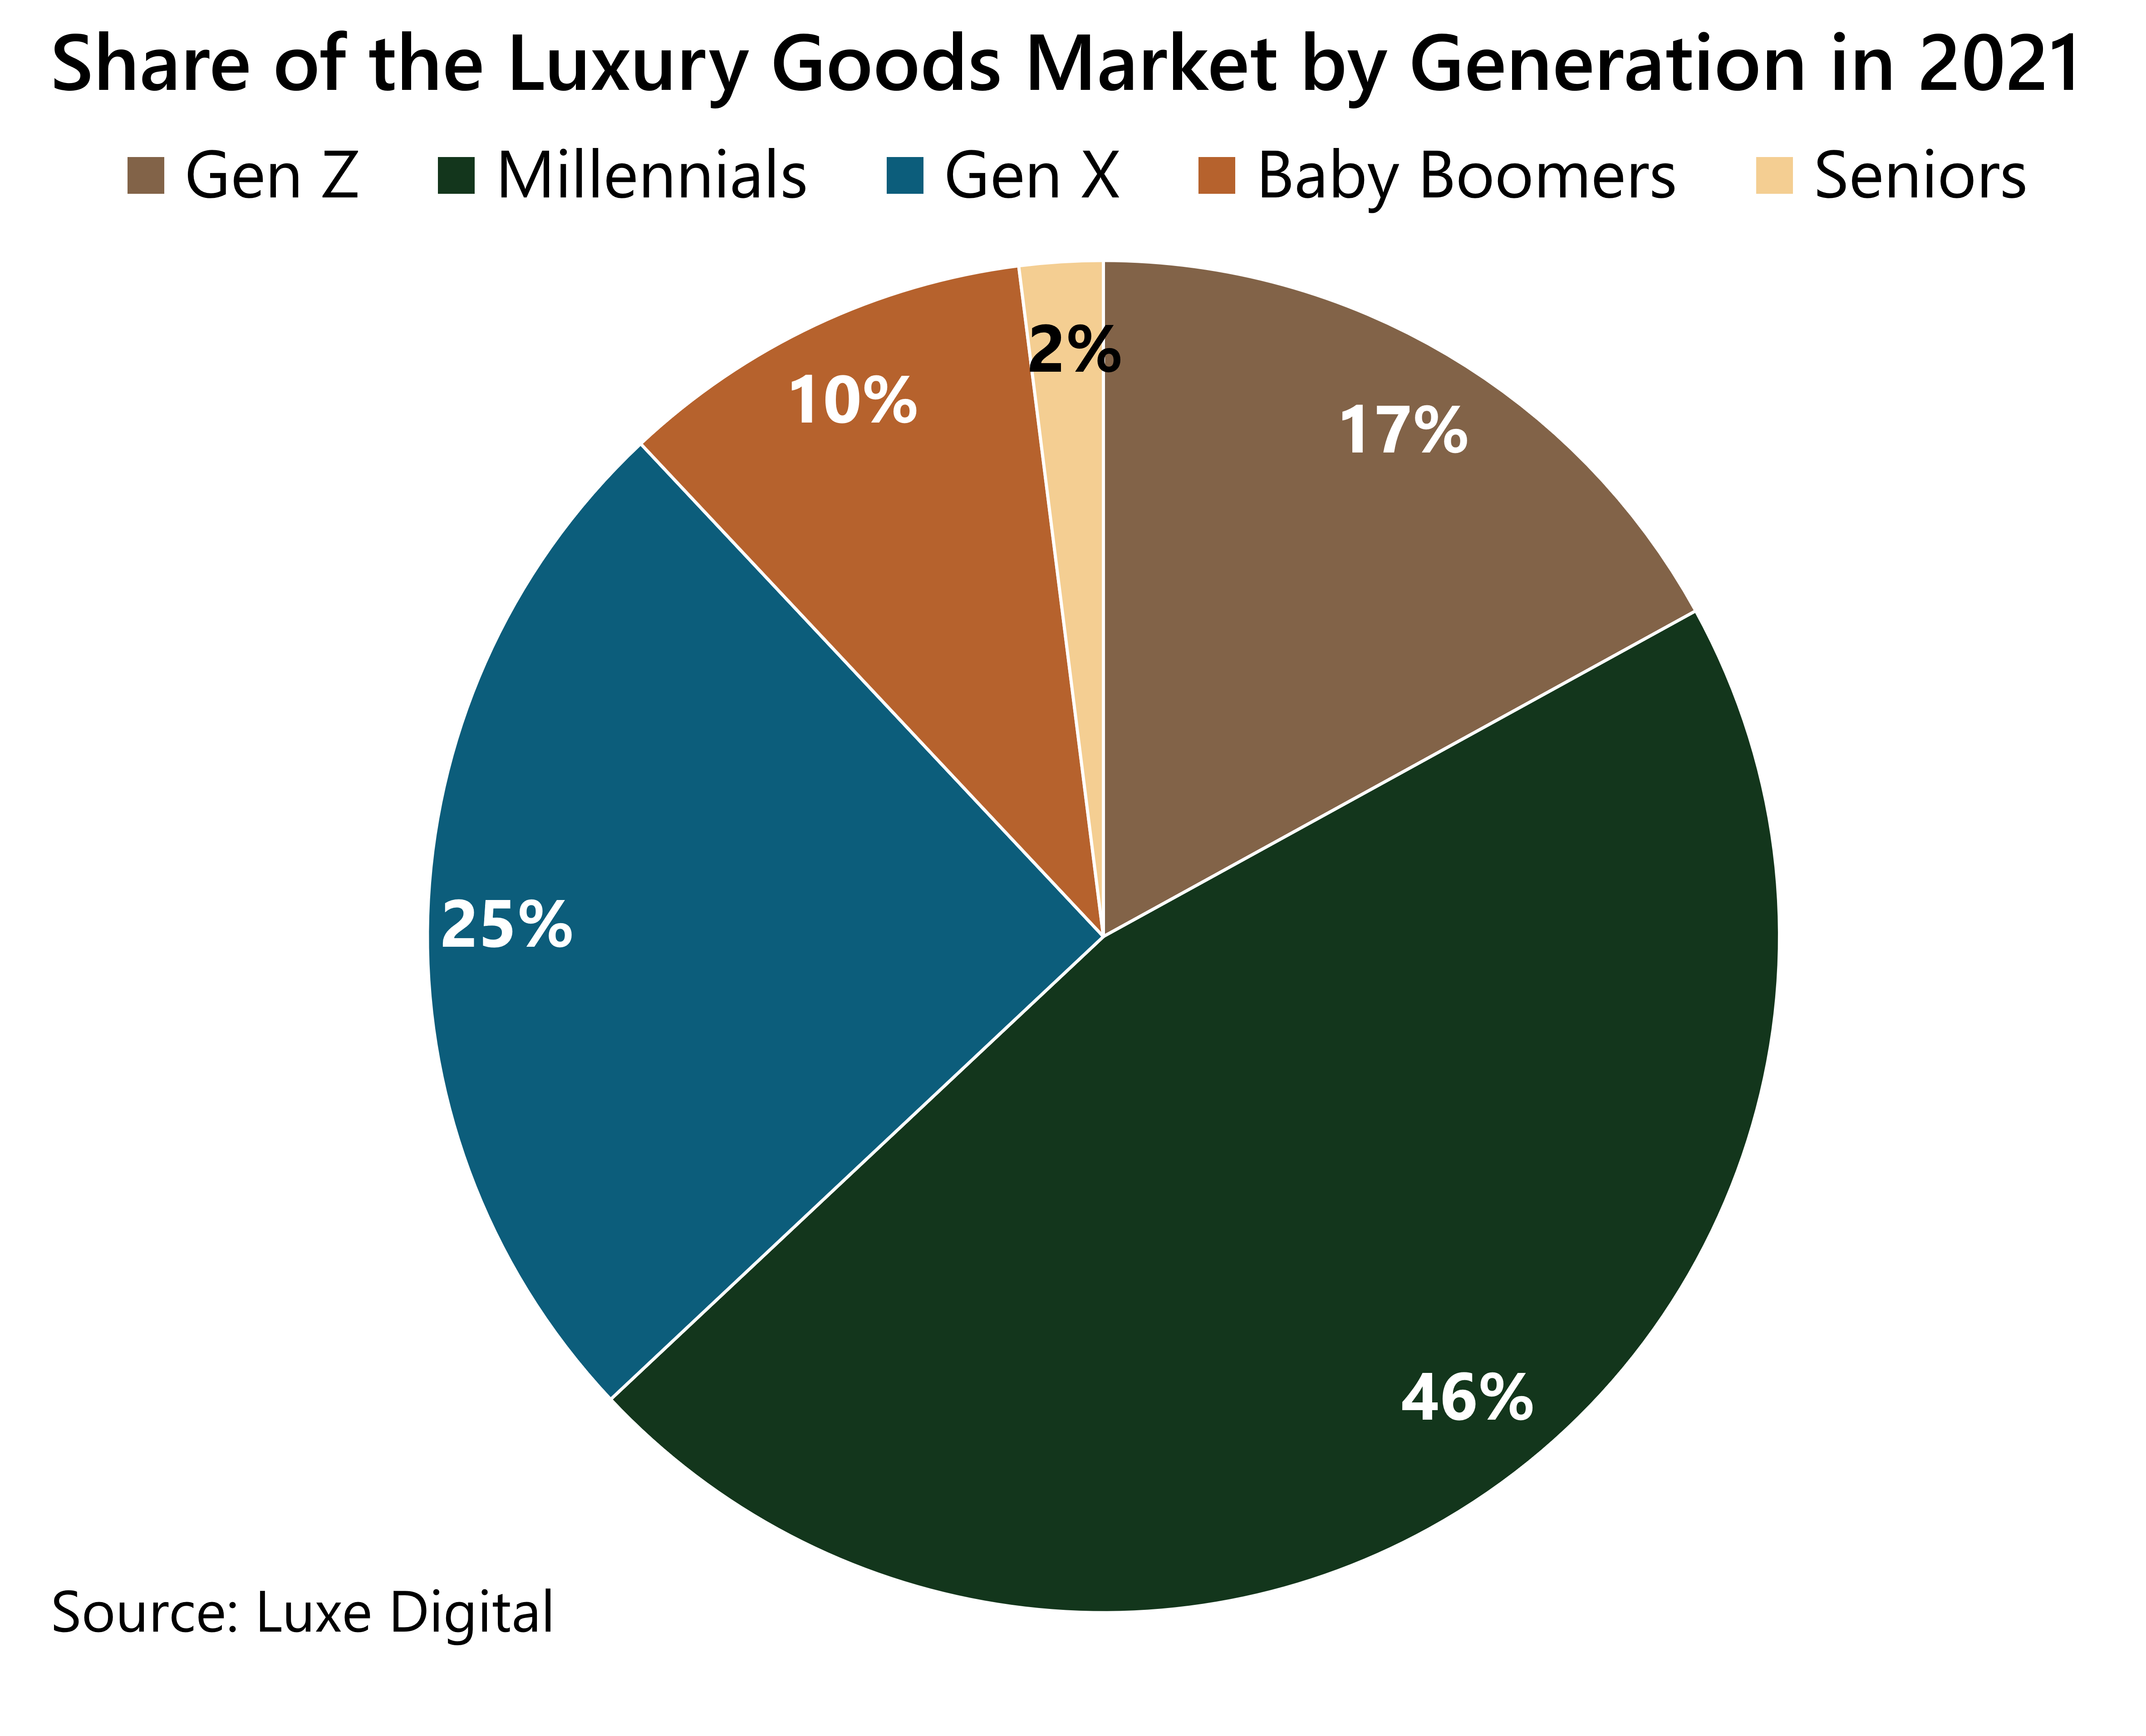 This chart shows the share of the luxury goods market by generation in 2021. Millenials make up for 46% and Gen Z 25%. 